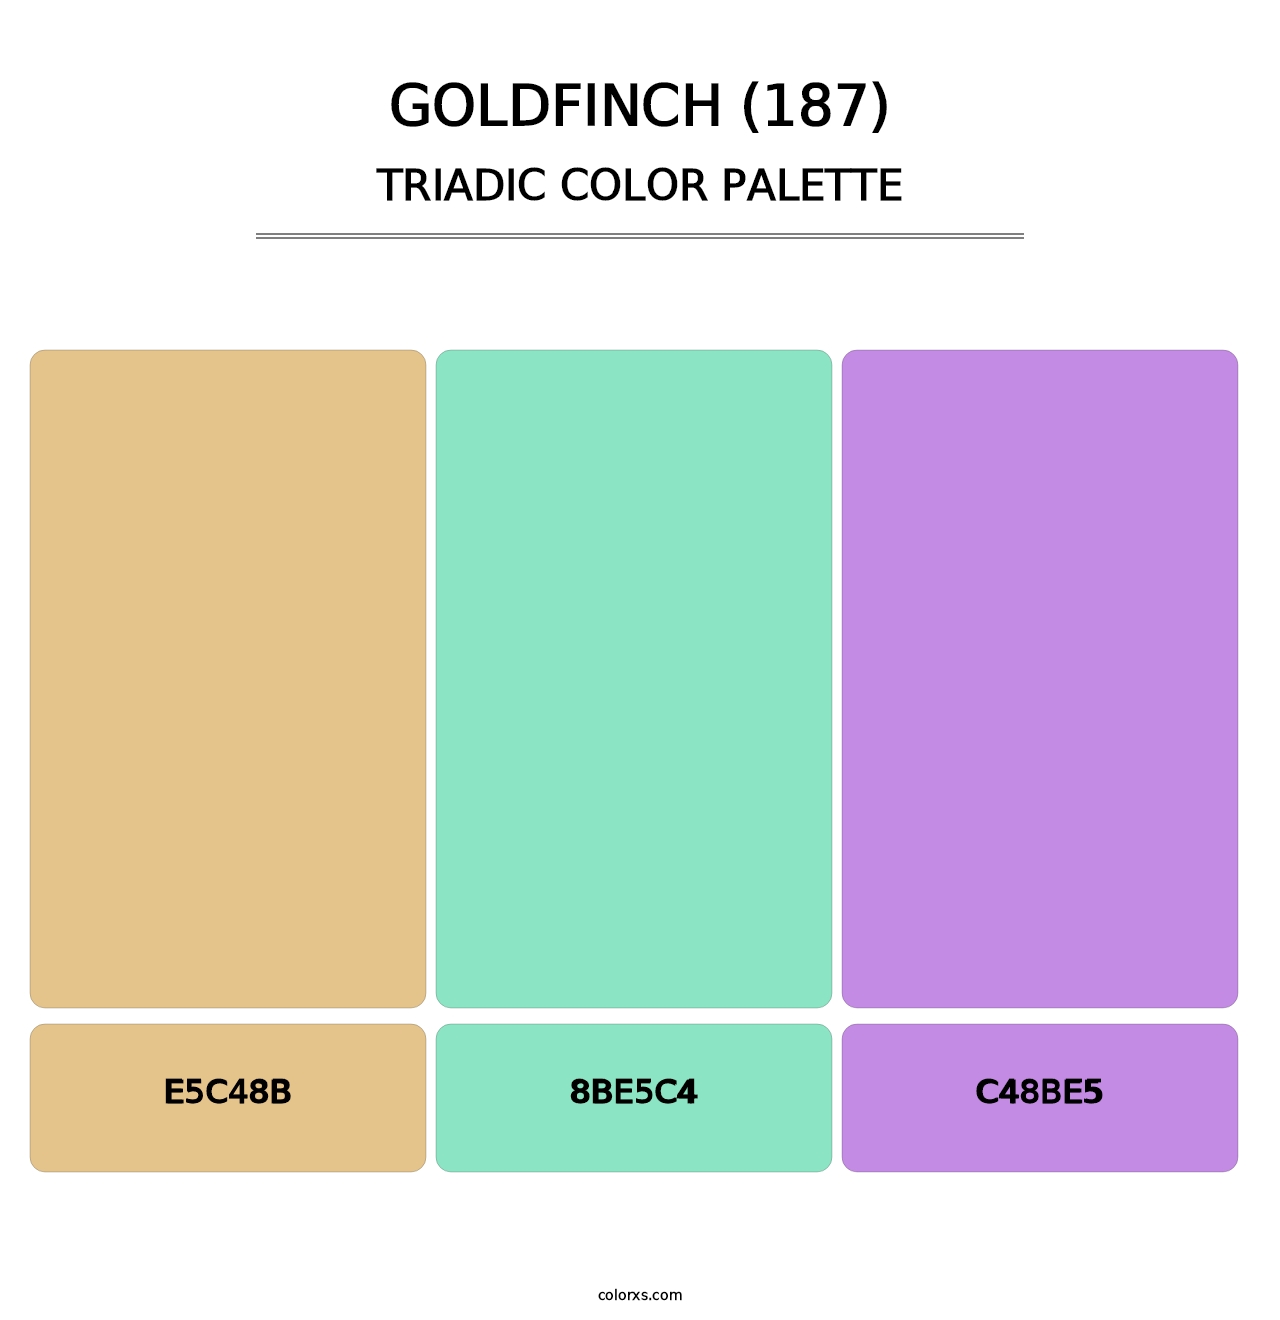 Goldfinch (187) - Triadic Color Palette